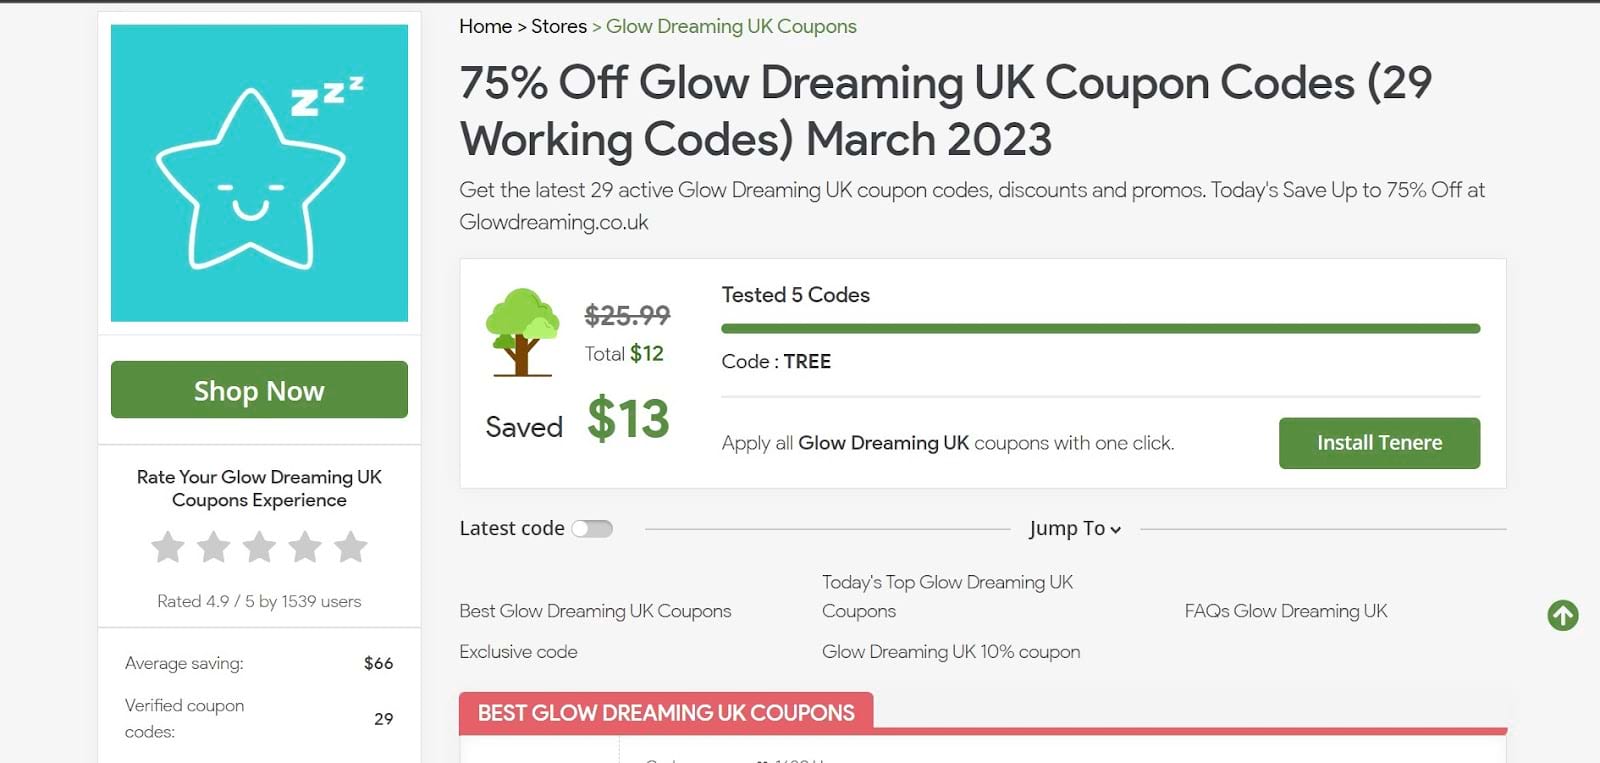 How To Use Glow Dreaming UK Discount Code 3